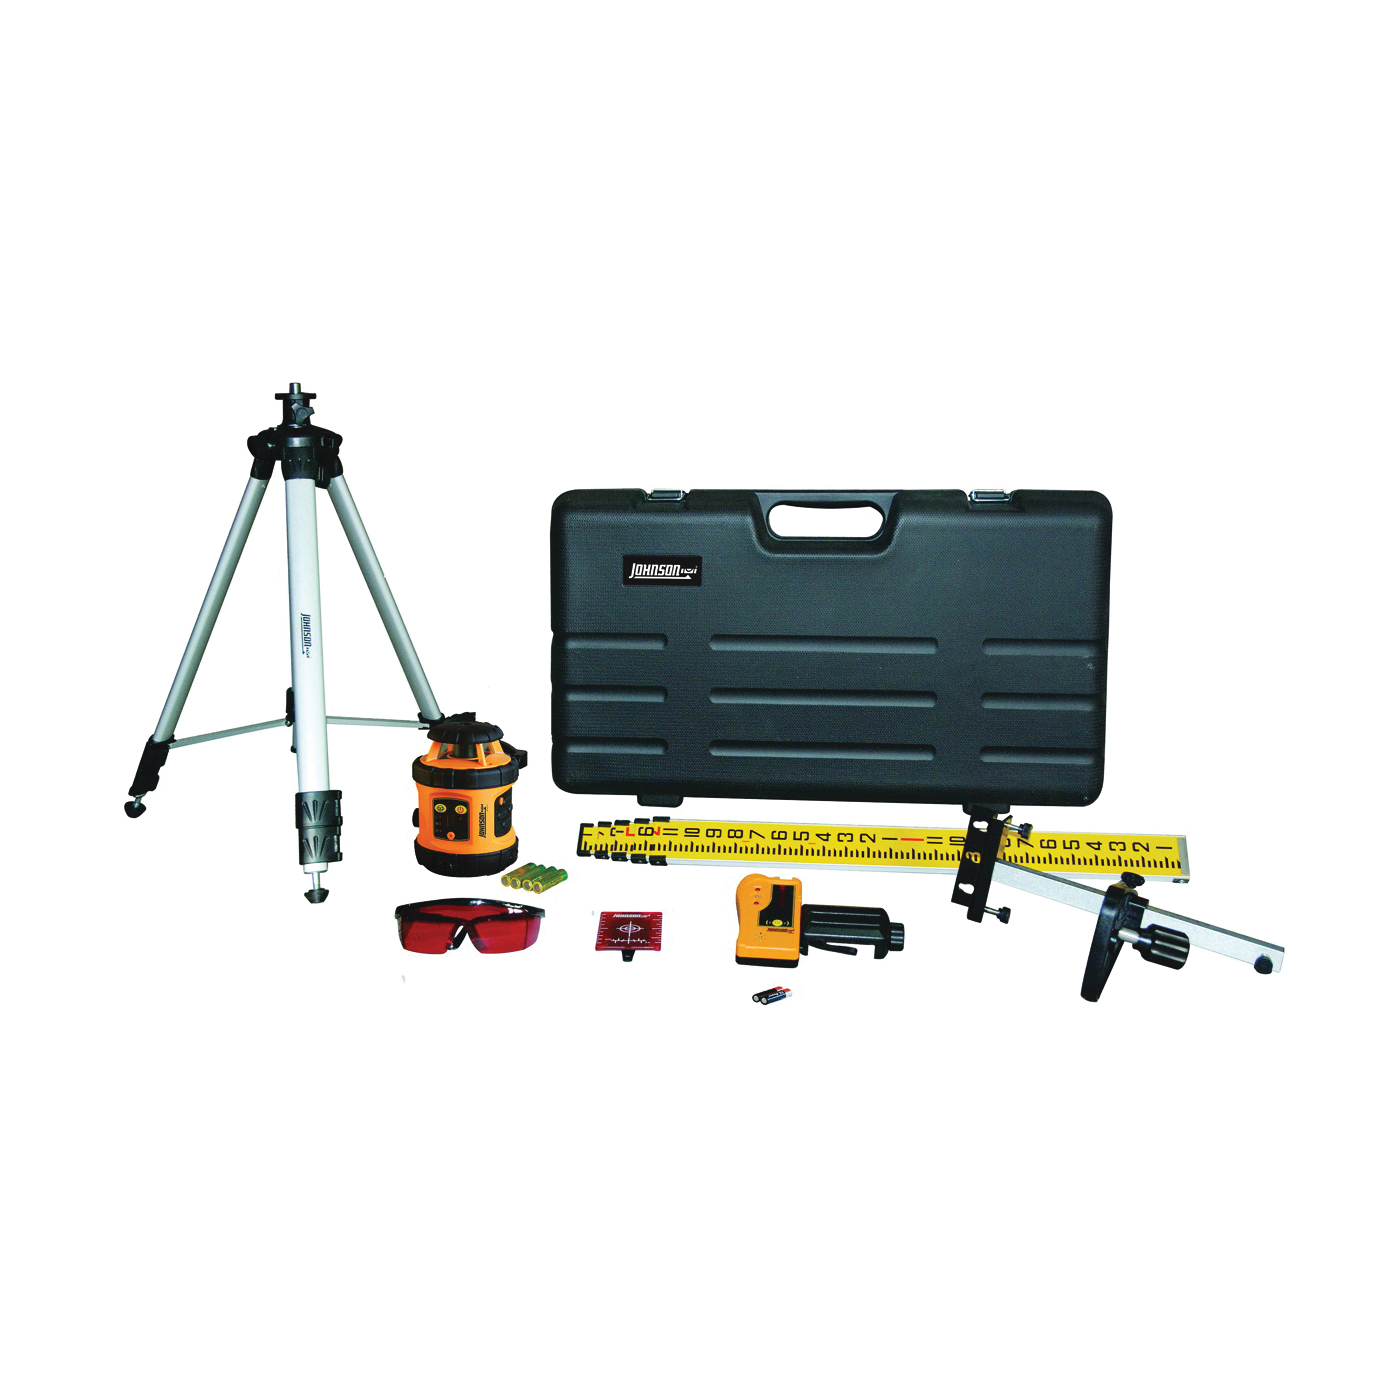 40-6517 Laser Level Kit, 200 ft, +/-1/8 in at 50 ft Accuracy, Red Laser